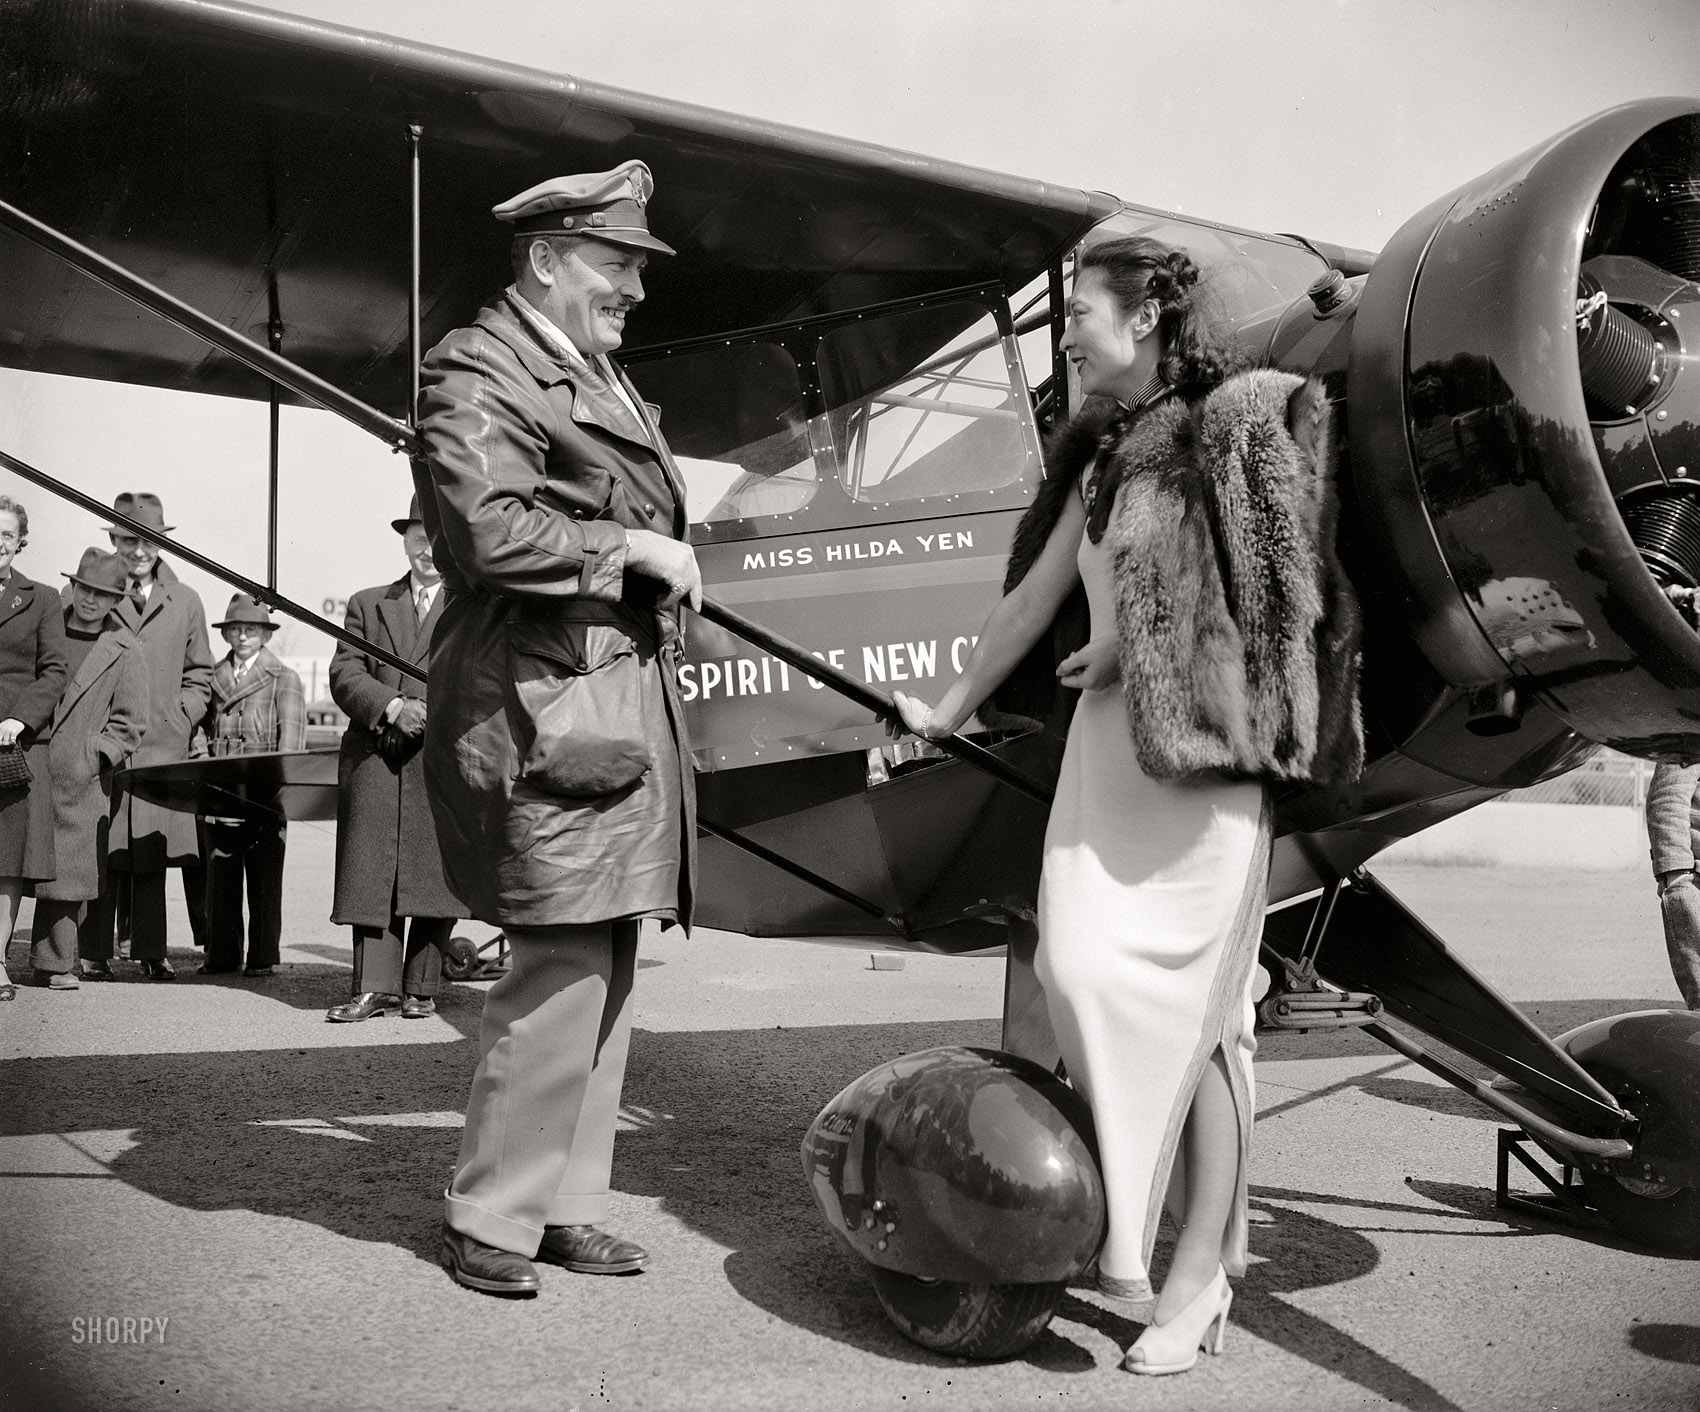 April 3, 1939. Washington, D.C. "Col. Roscoe Turner, winner of speed trophies in the air, dropped down to Washington Airport today with a red high-wing monoplane which he presented to the friends of New China, represented by Miss Hilda Yen, Chinese Aviatrix. The plane, 'Spirit of New China.' was built by the Porterfield factory." Harris & Ewing Collection glass negative. View full size.